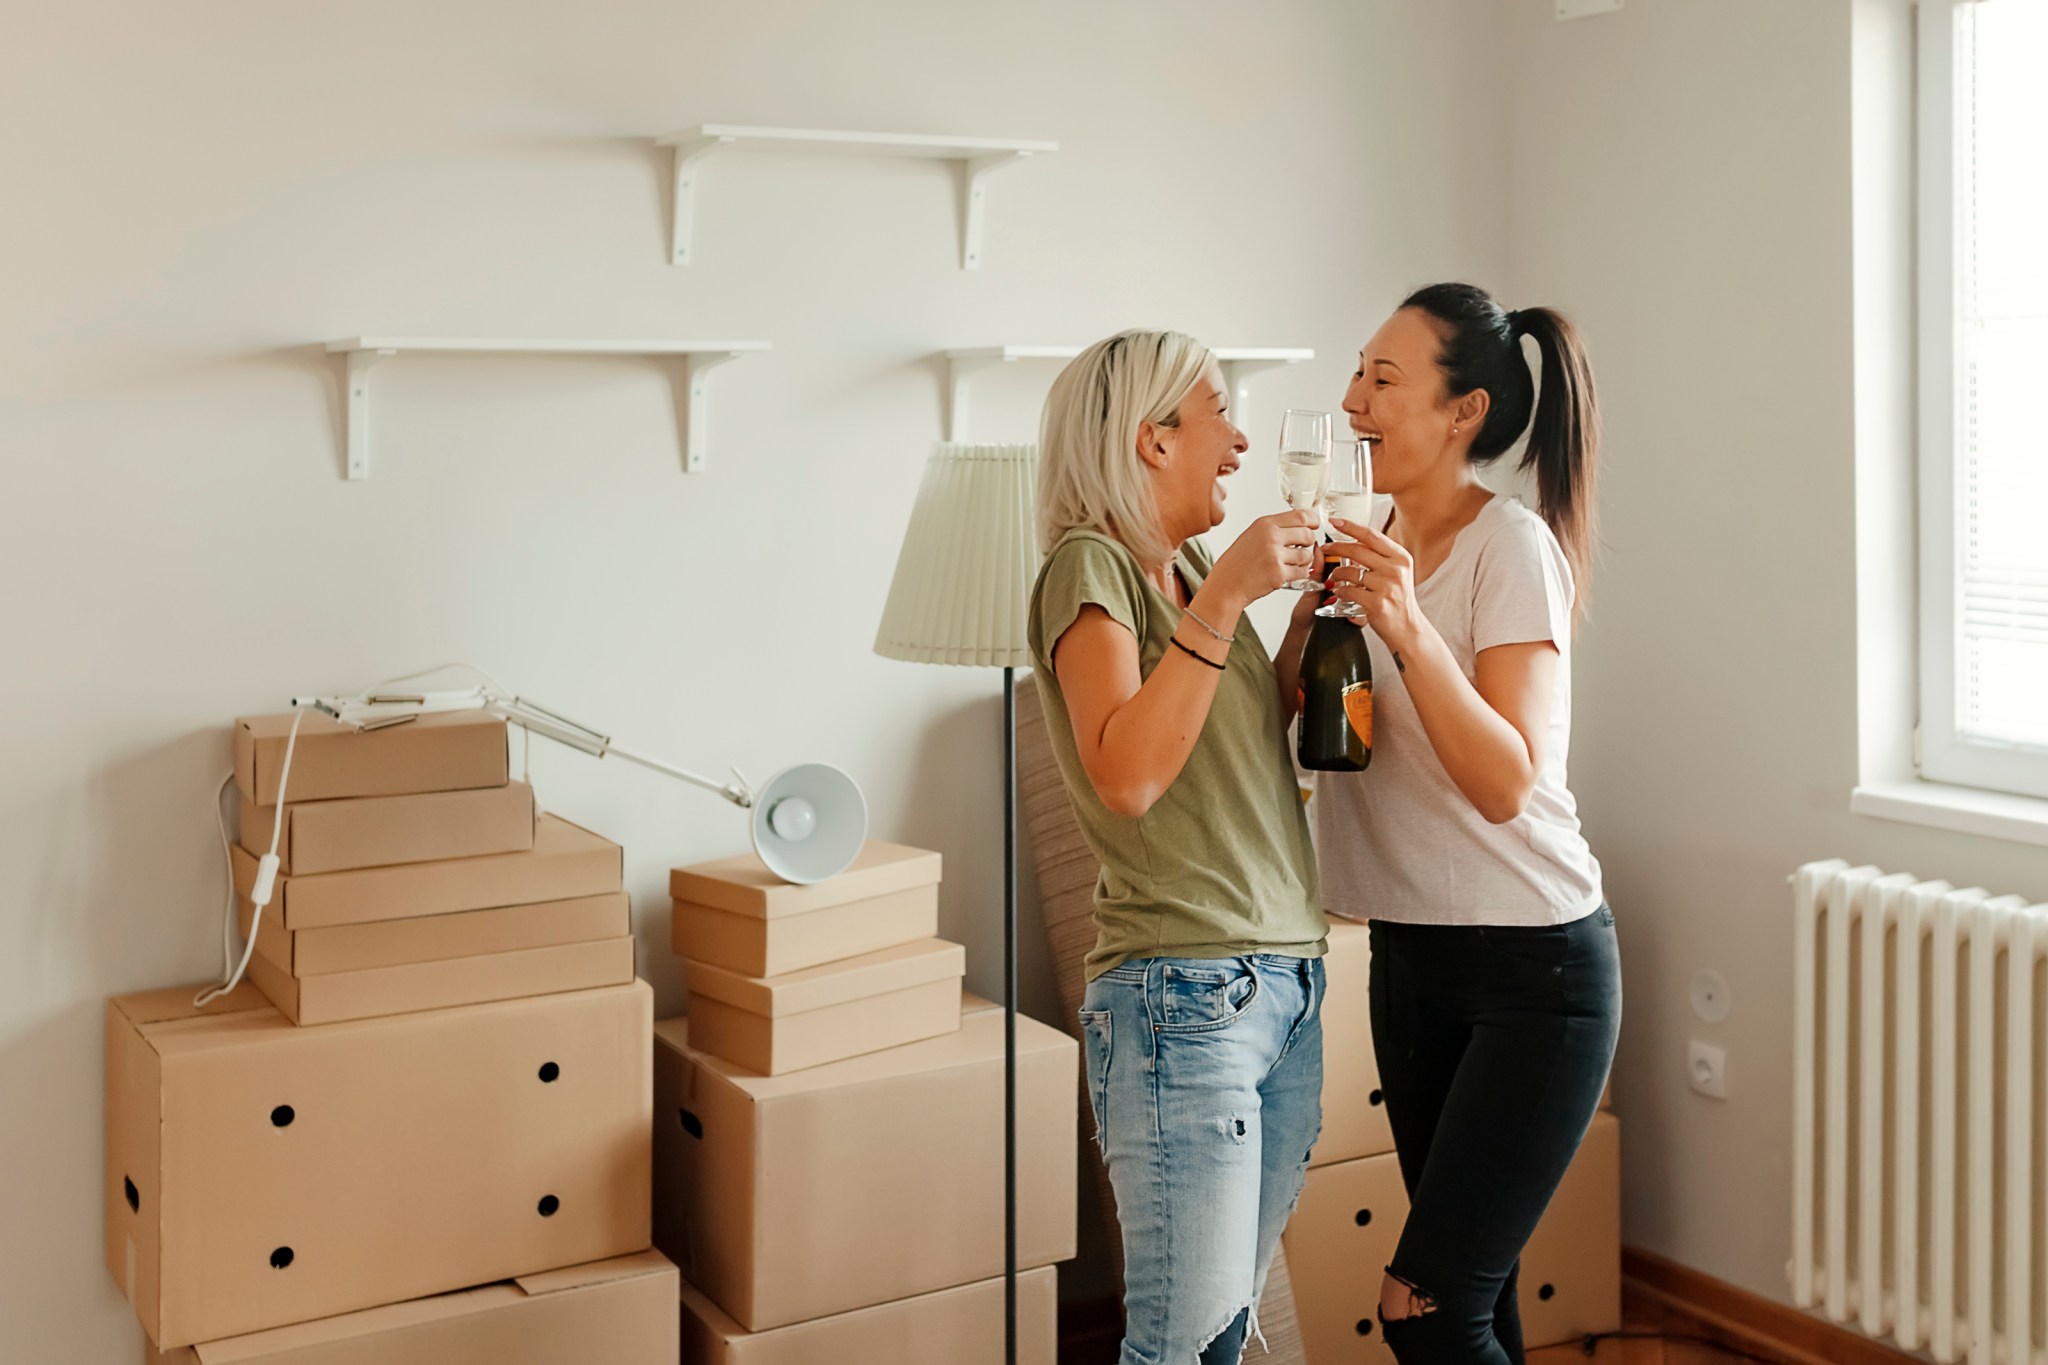 two female first time home buyers celebrate new house purchase ownership on moving day standing among boxes